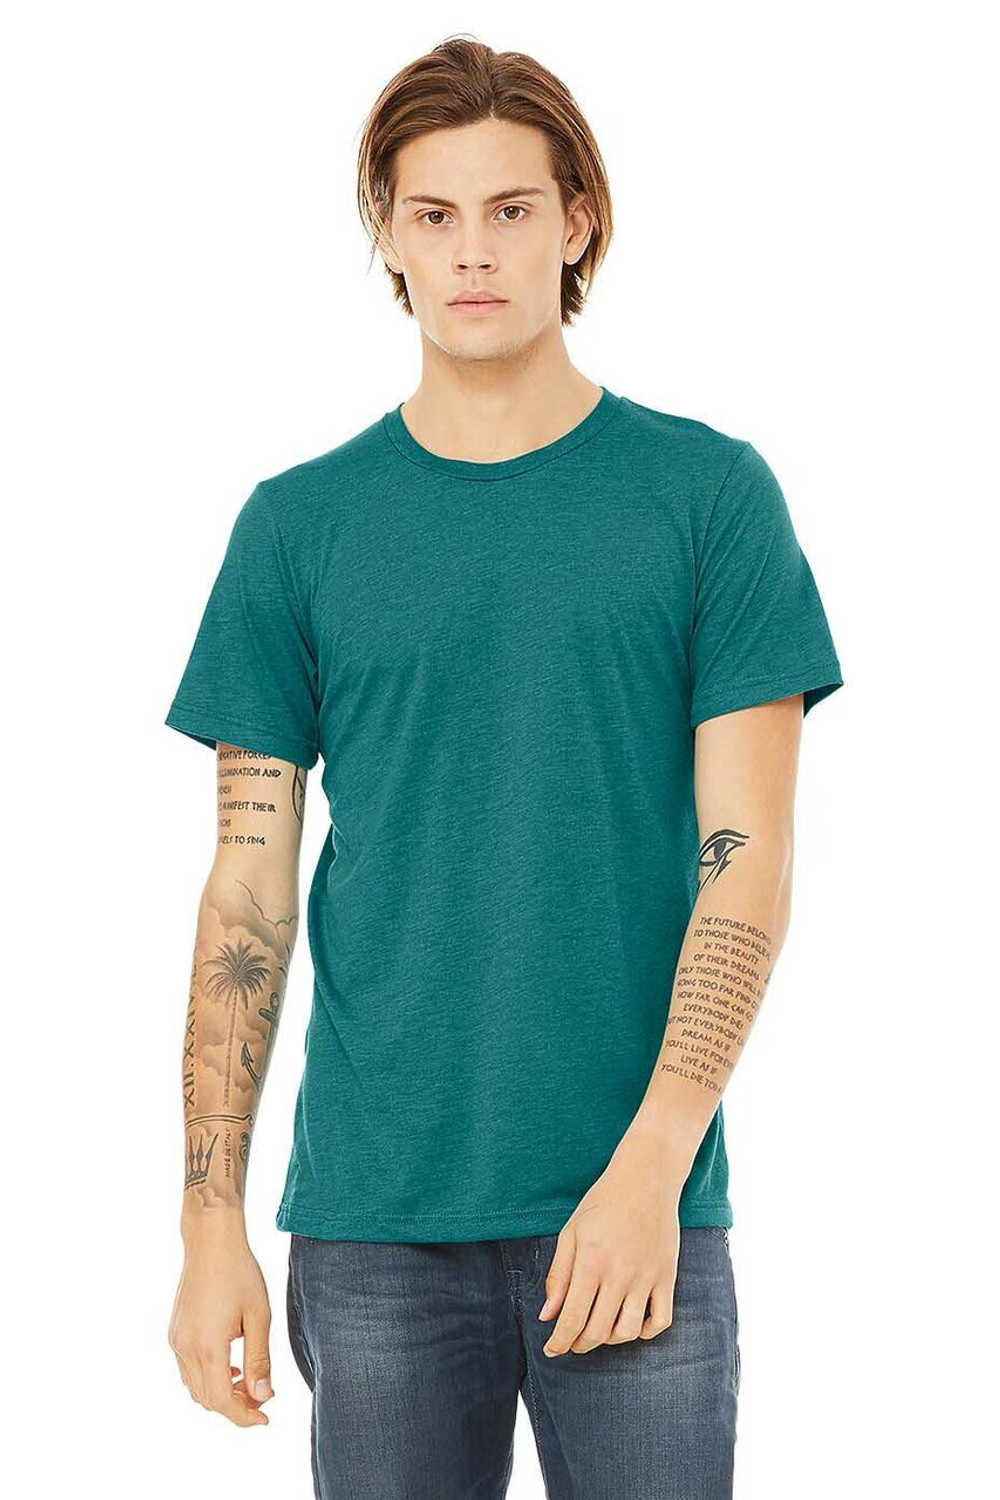 Short sleeve t-shirt, wide neckline and funnel neck with adjustable drawcord